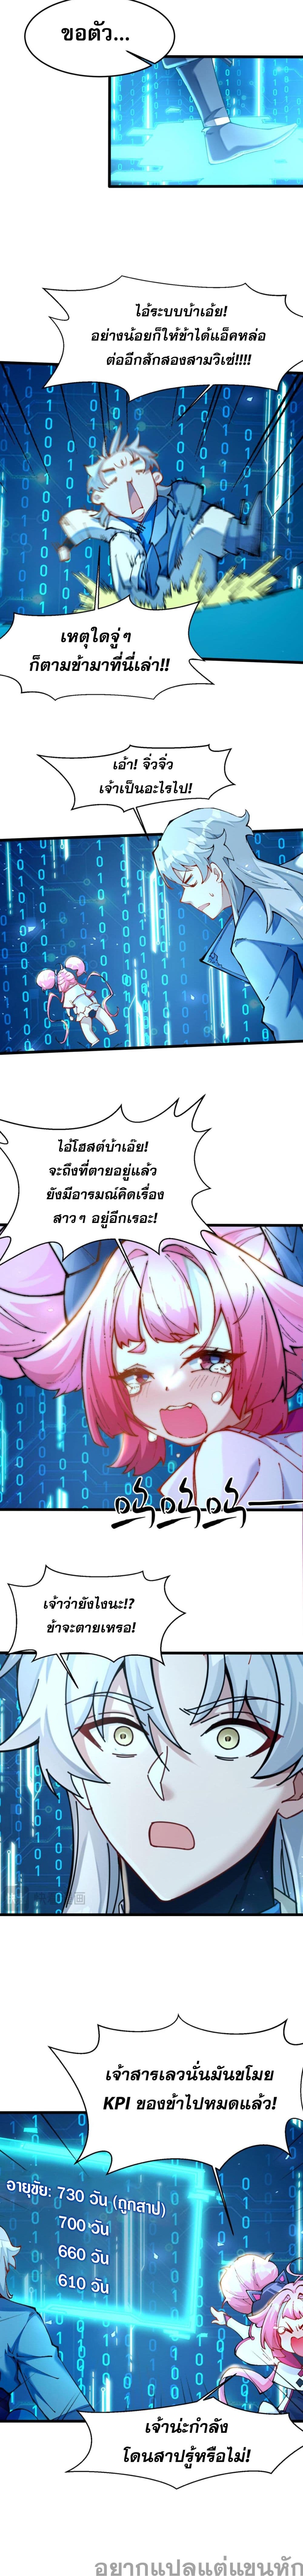 I Have Hundreds of Millions of Years of Cultivation ข้ามีพลังบำเพ็ญหนึ่งล้านปี 7-7